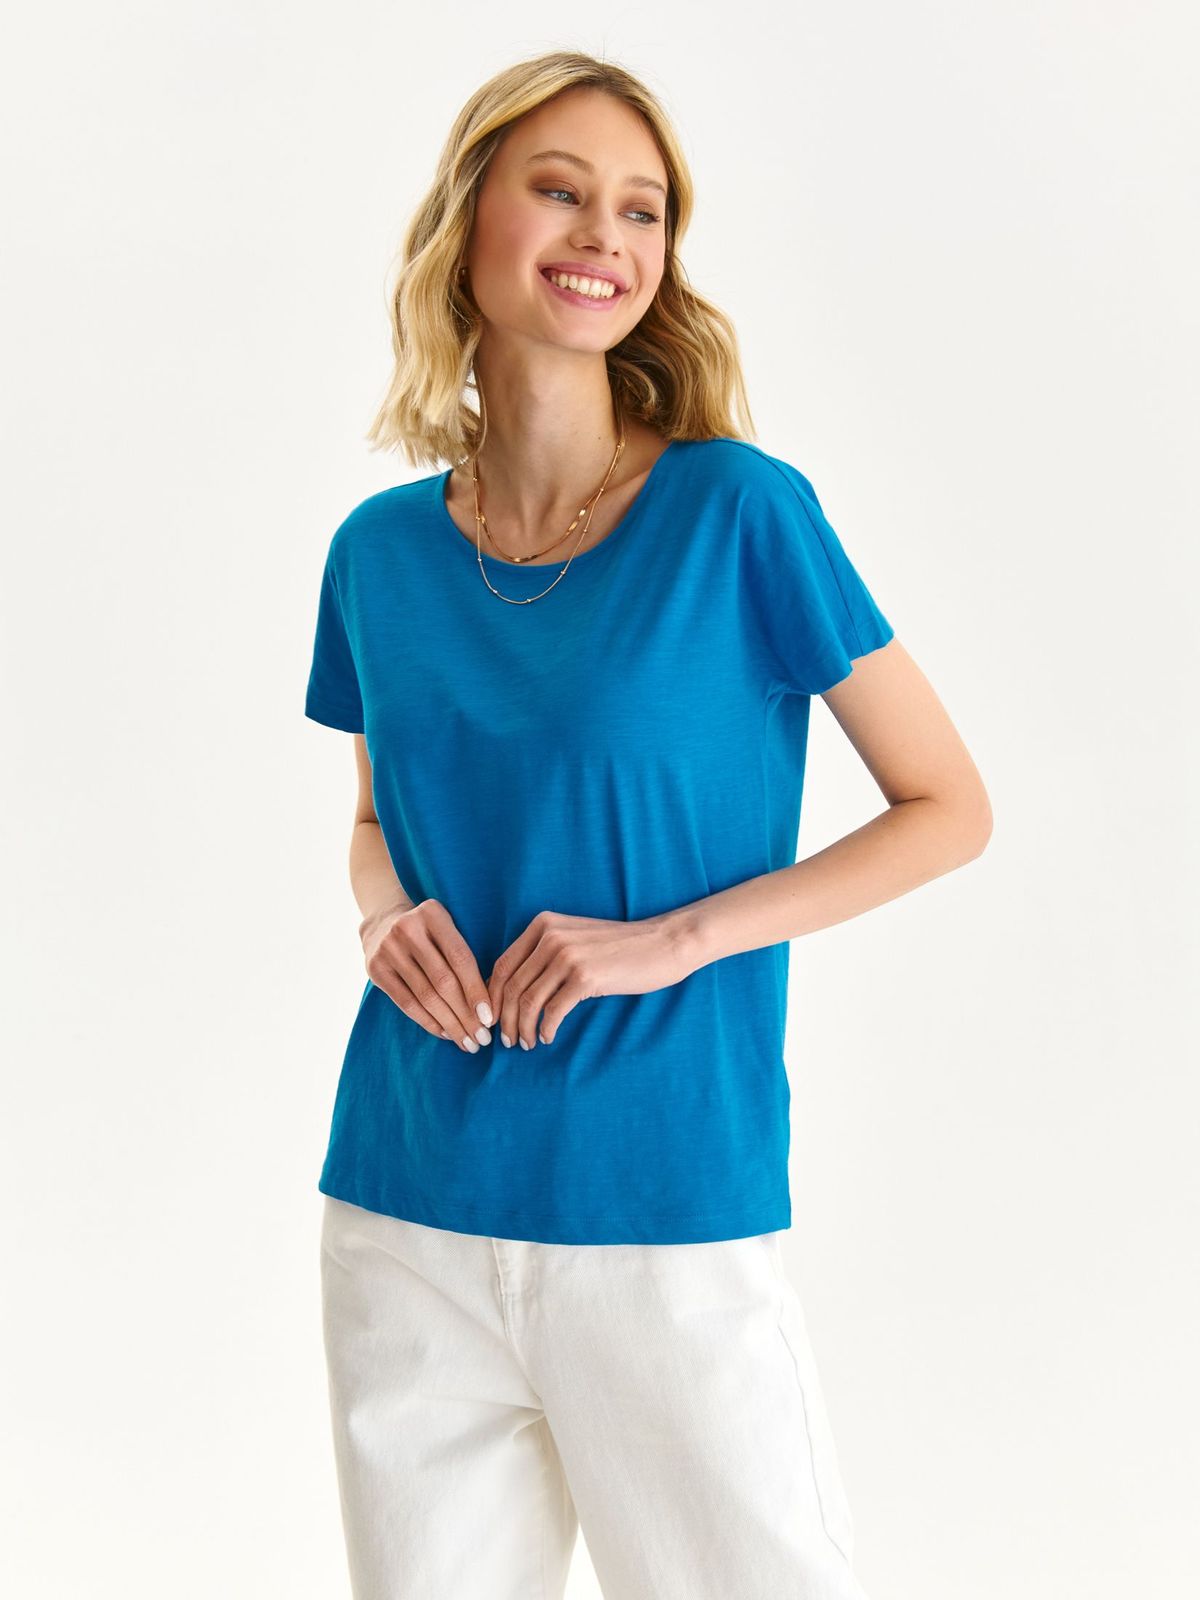 Blue t-shirt slightly elastic cotton loose fit with rounded cleavage